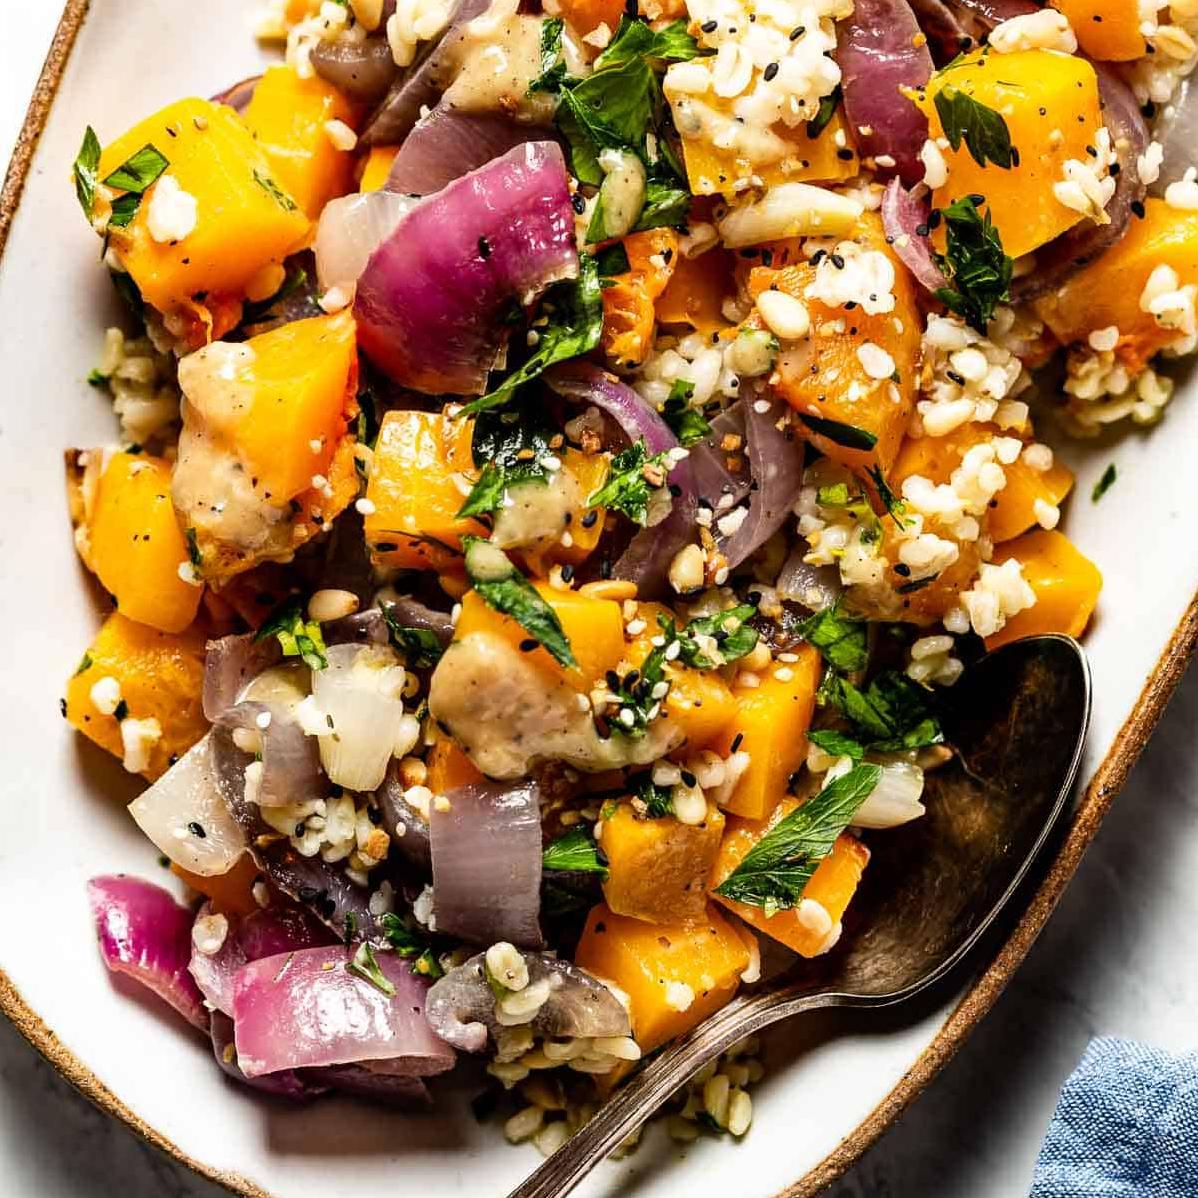  Excite your palate with this mouth-watering Butternut Squash and Lebanese Spiced Ground Beef recipe.